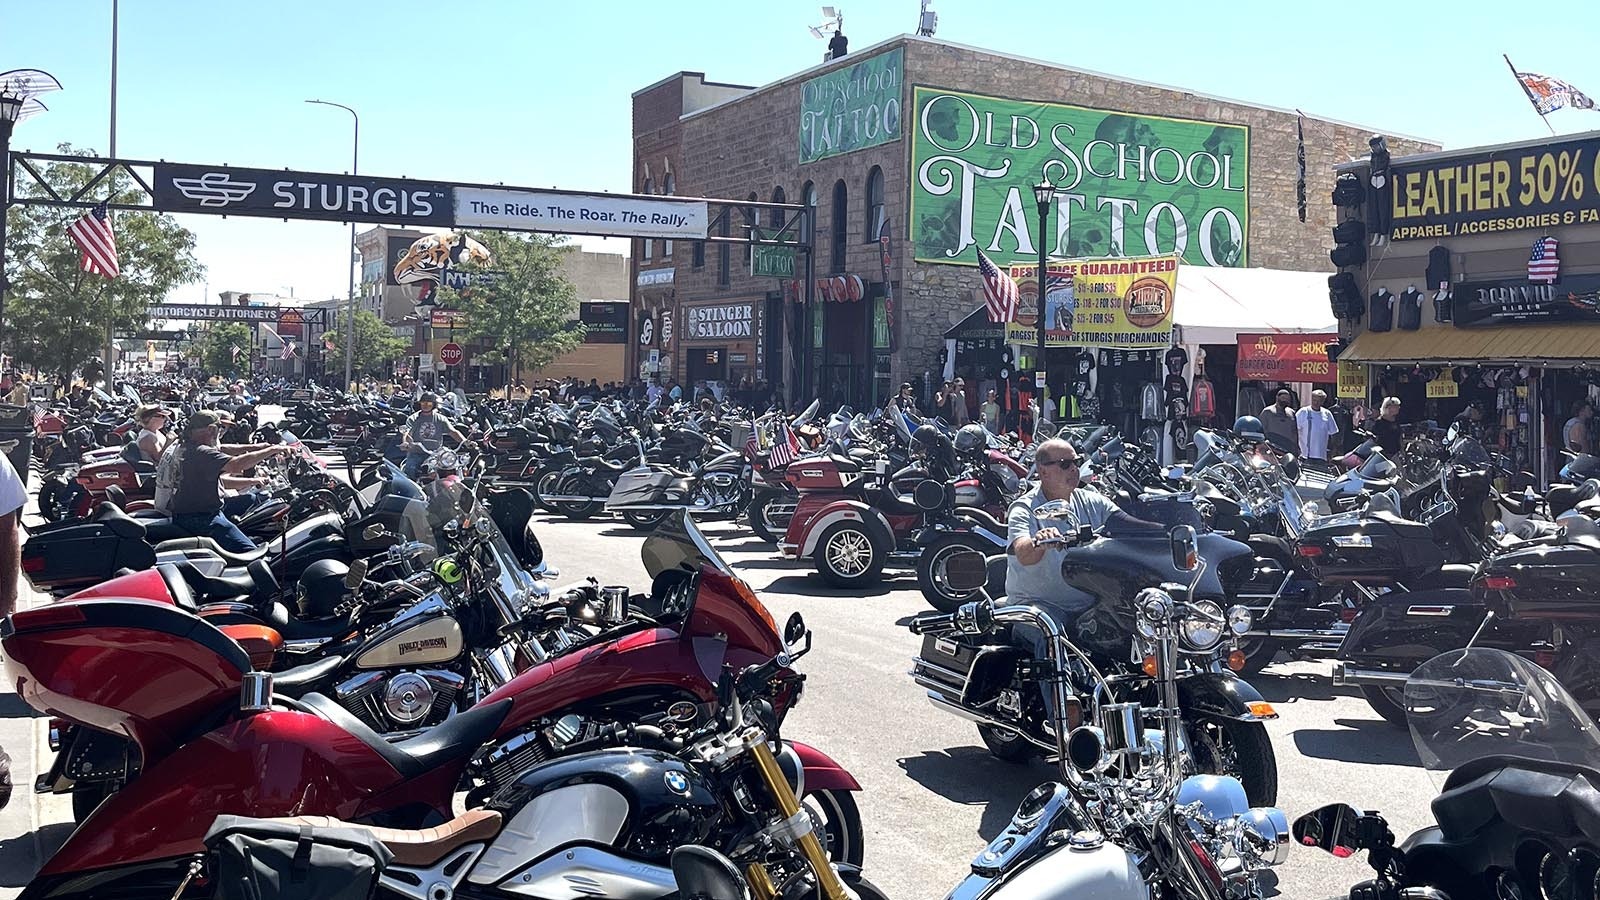 It may not look it by the crowds of bikes lining the main drag in Sturgis, South Dakota, but locals say the first day of the 84th Sturgis Motorcycle Rally was a little slow.